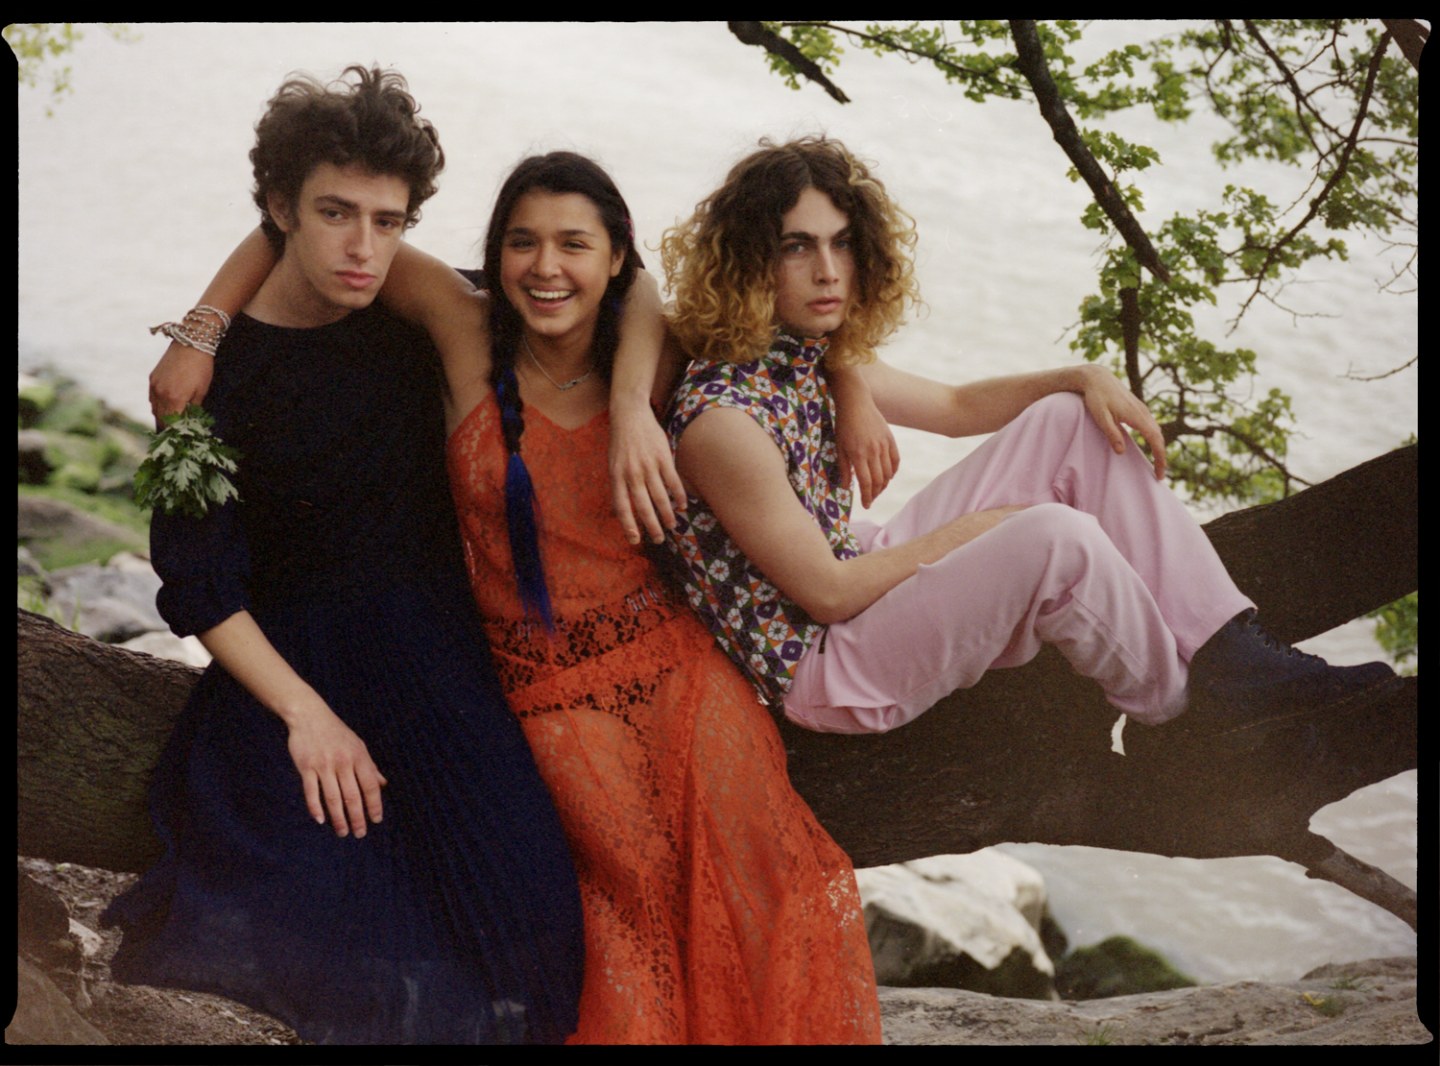 Celebrate “Anti-Prom” With A Breezy Fashion Shoot From Brujas And Gypsy Sport